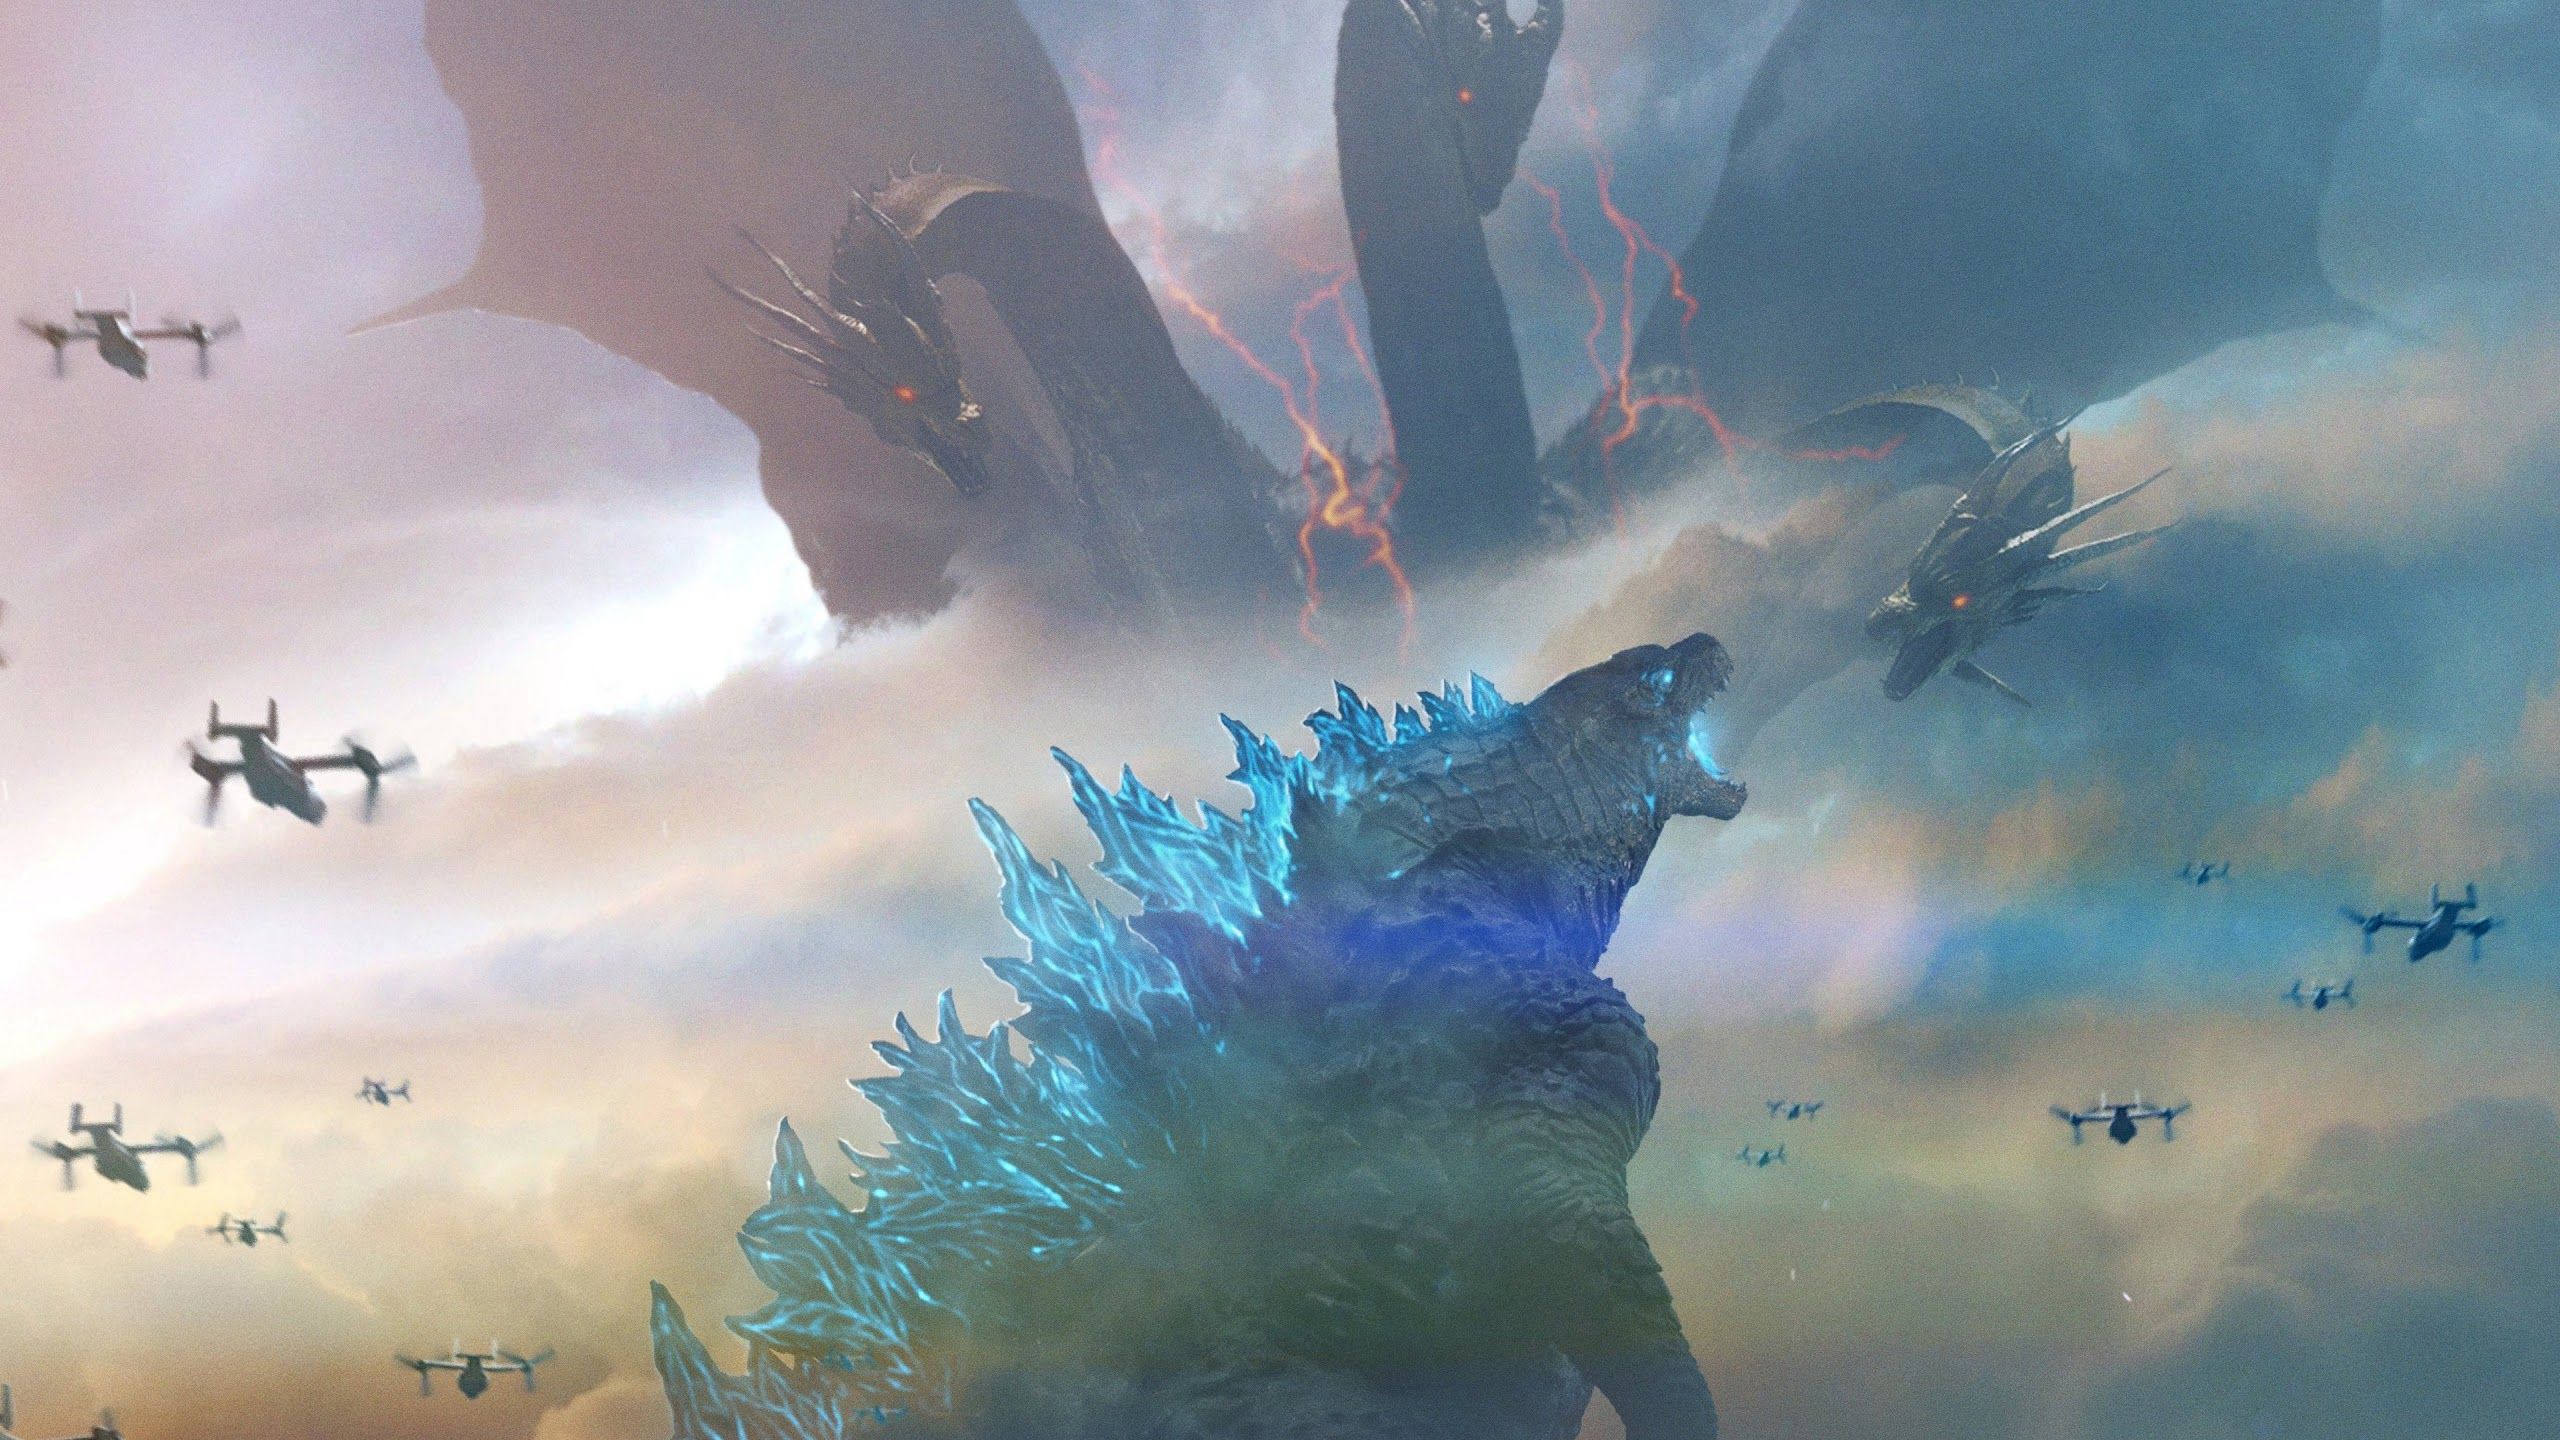 Godzilla king of the monsters android wallpaper HD Godzilla king of the monsters key art on behance